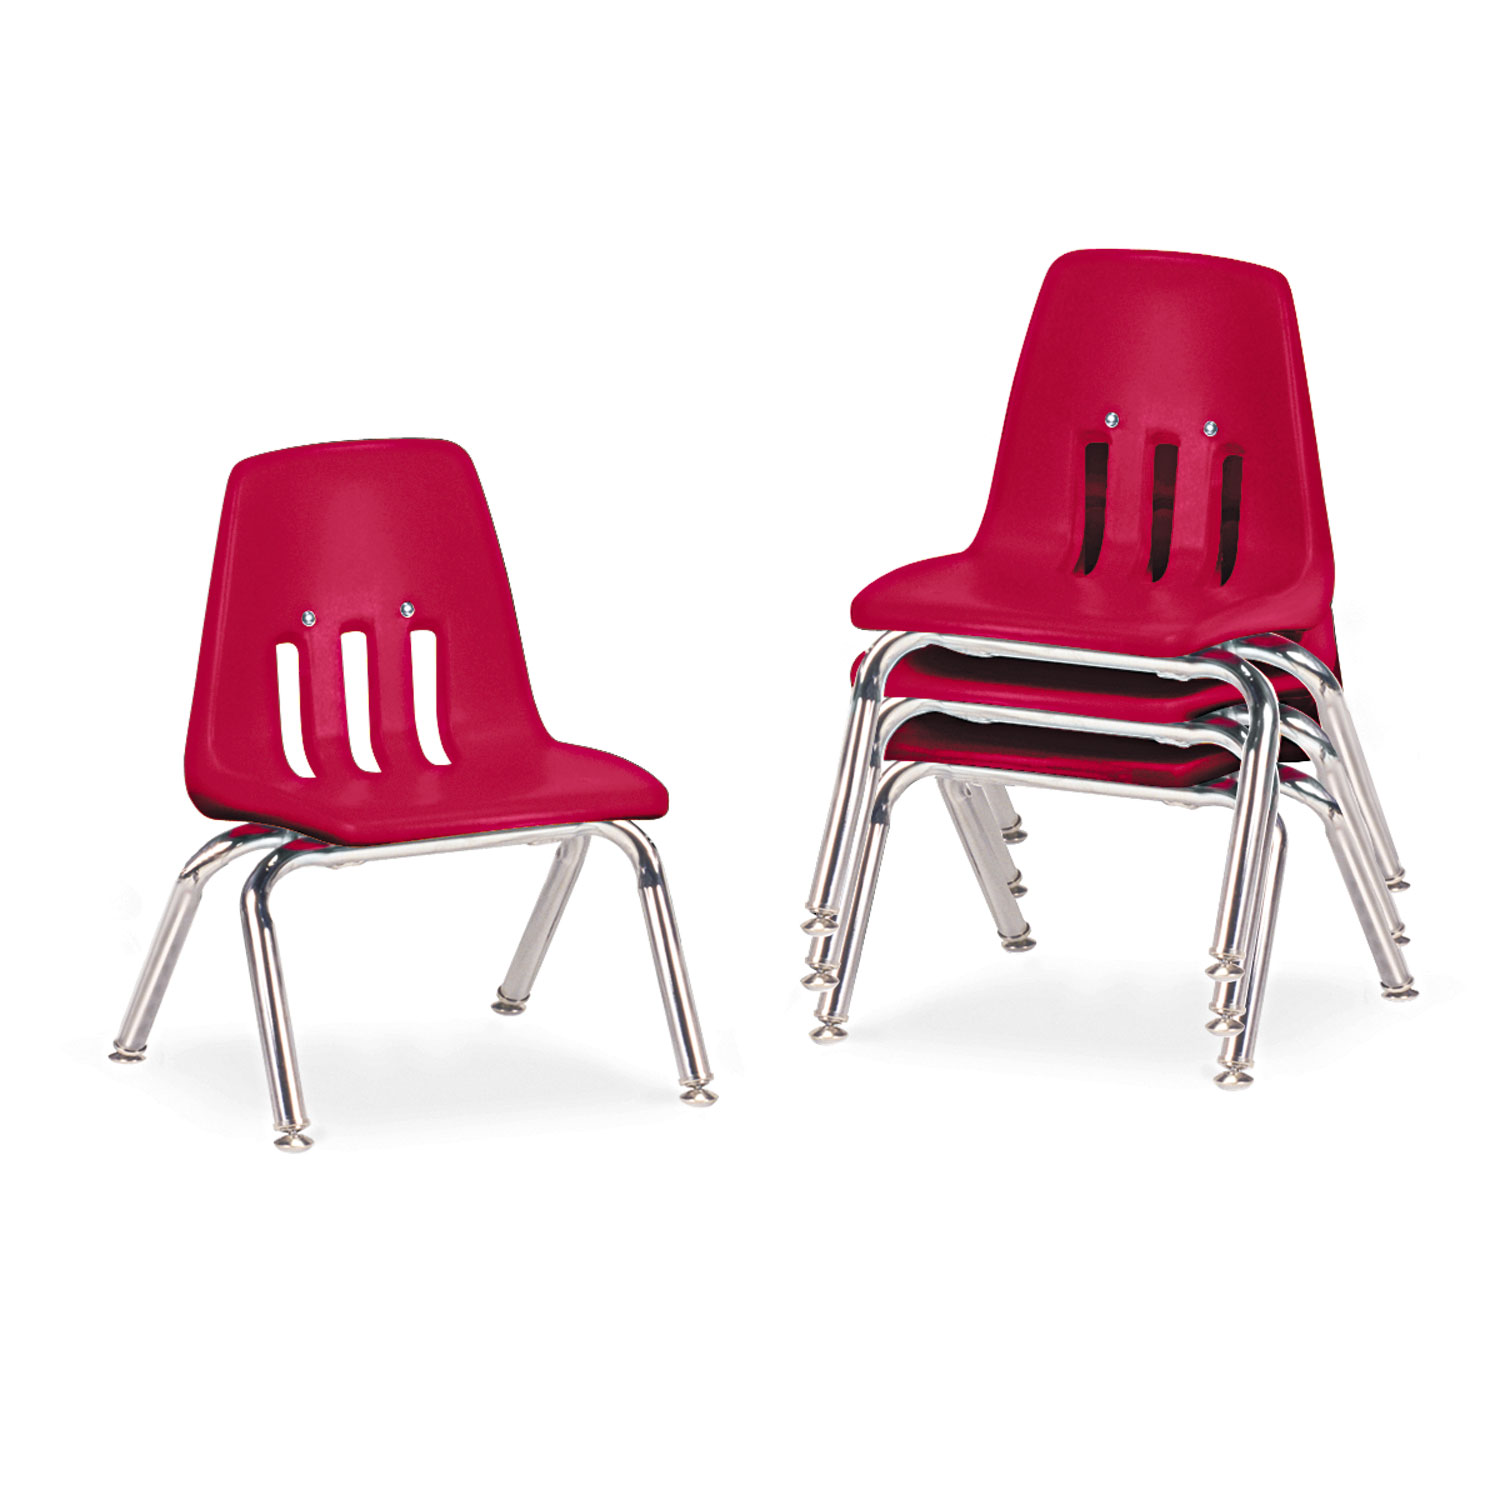 9000 Series Classroom Chairs, 10 Seat Height, Red/Chrome, 4/Carton